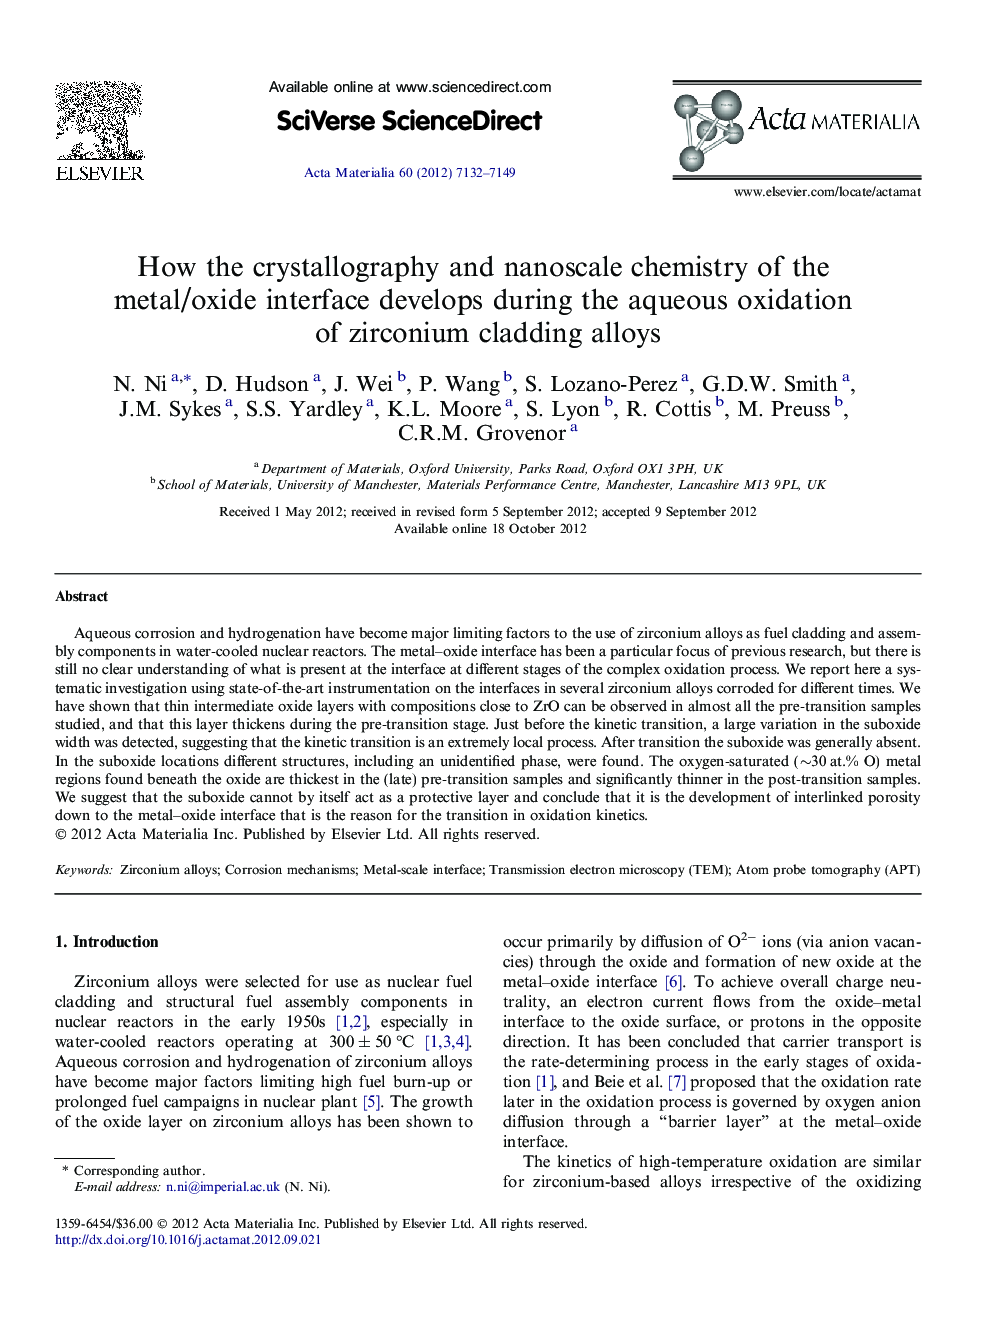 How the crystallography and nanoscale chemistry of the metal/oxide interface develops during the aqueous oxidation of zirconium cladding alloys